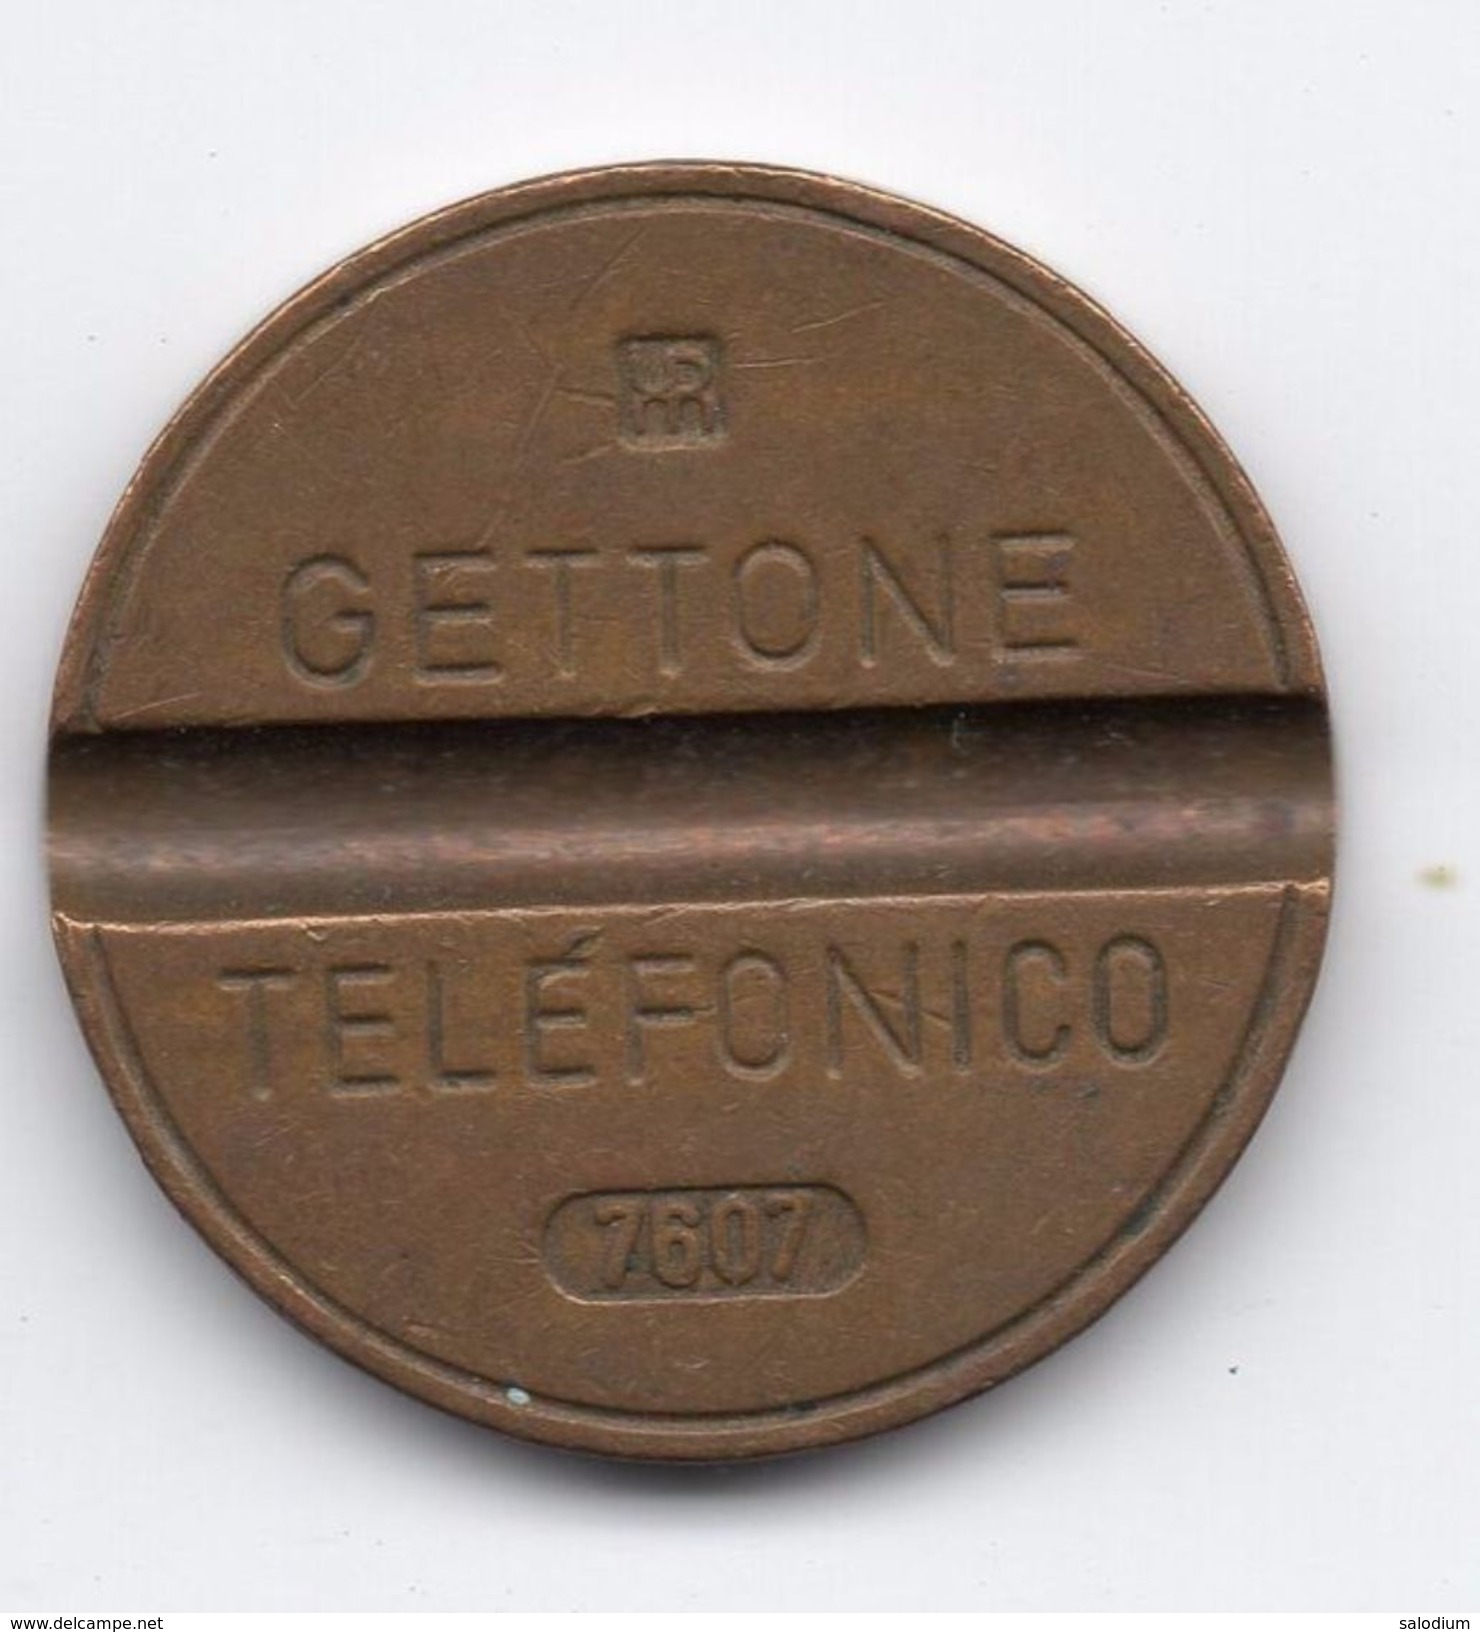 Gettone Telefonico 7607 Token Telephone - (Id-773) - Professionals/Firms